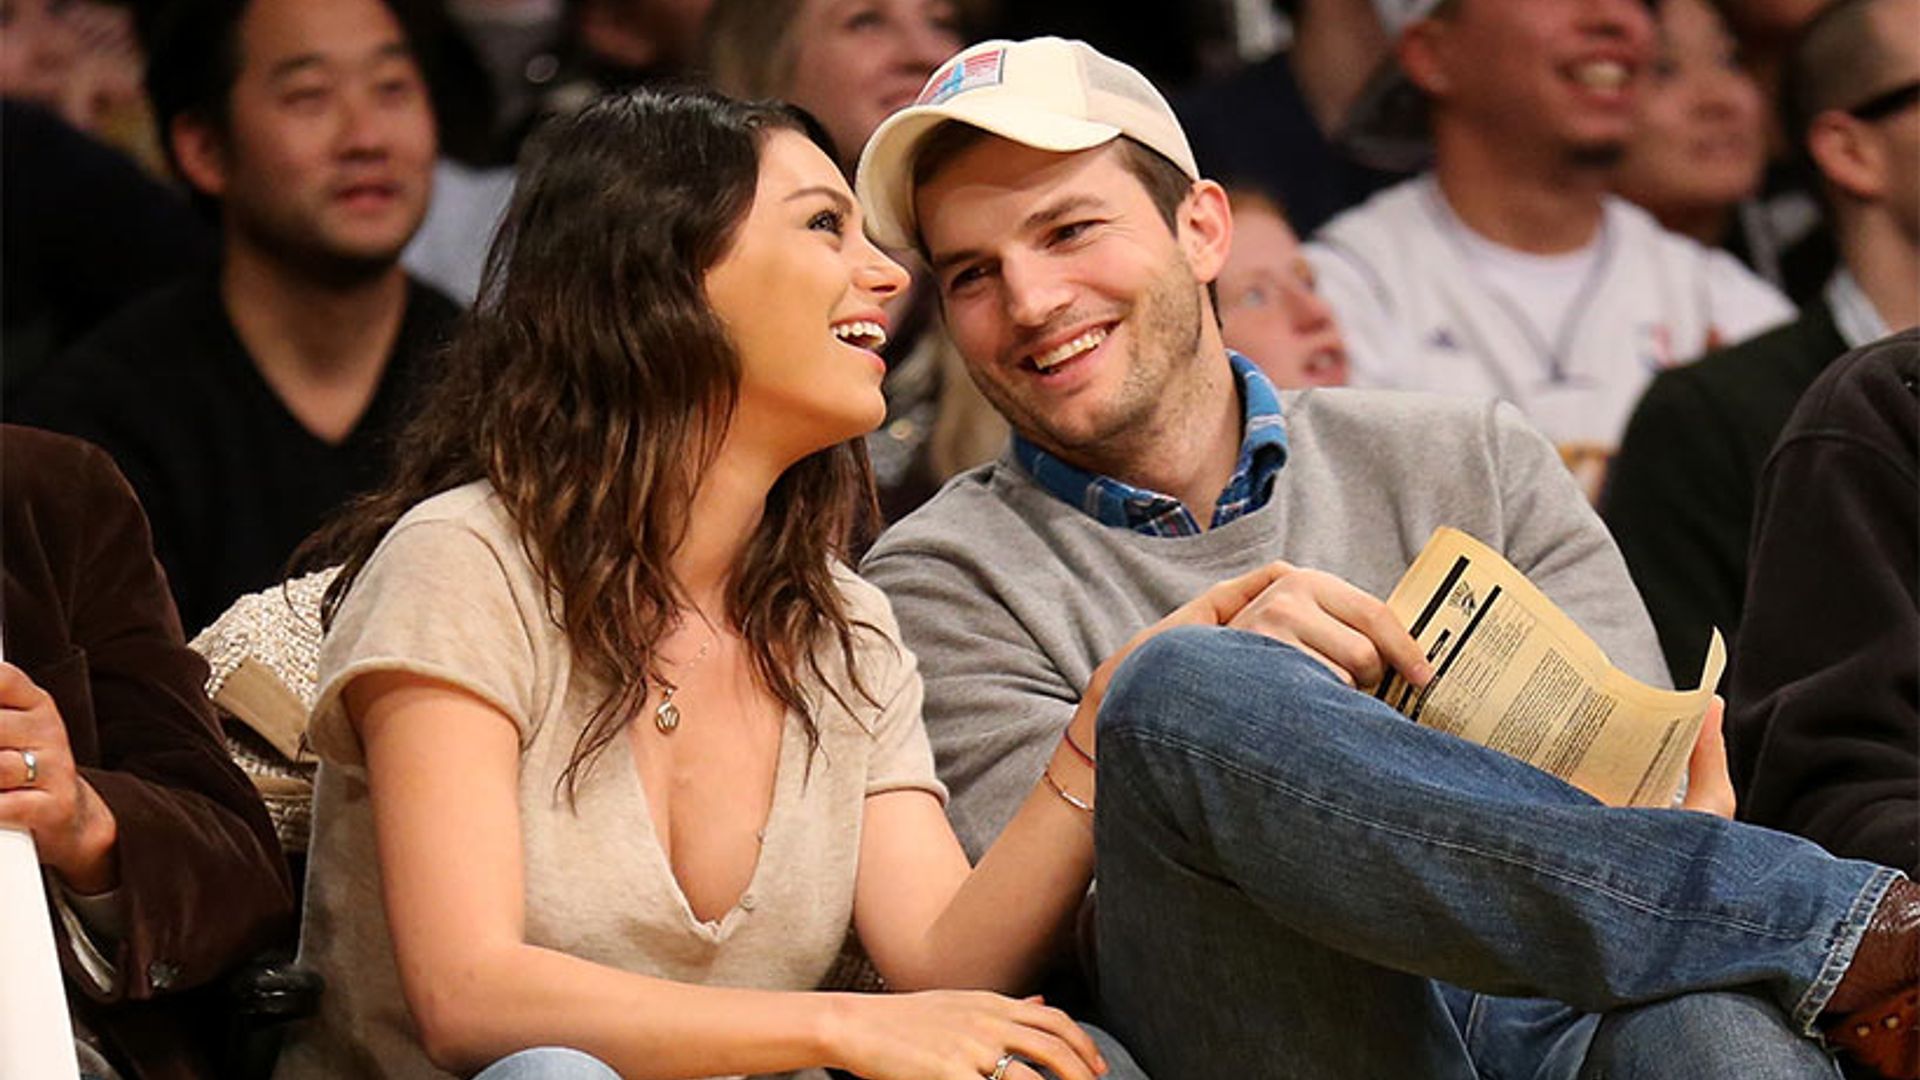 Ashton Kutcher reveals name he and Mila Kunis nearly picked for son